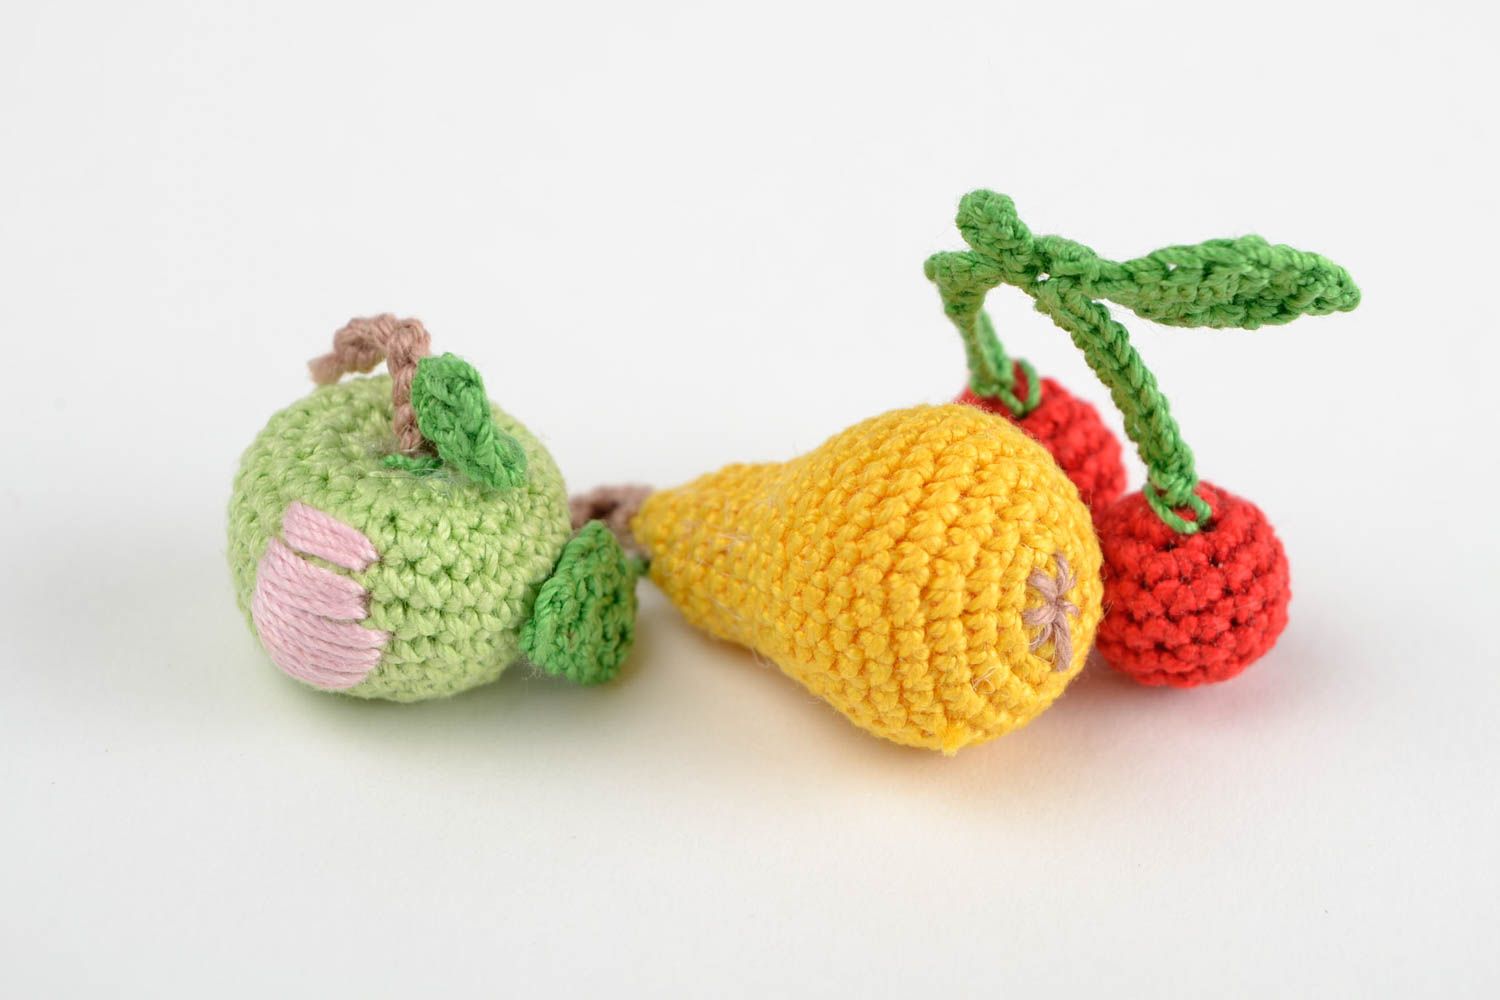 Handmade toy unusual toy for kids designer soft toy crocheted toy set of 4 items photo 5